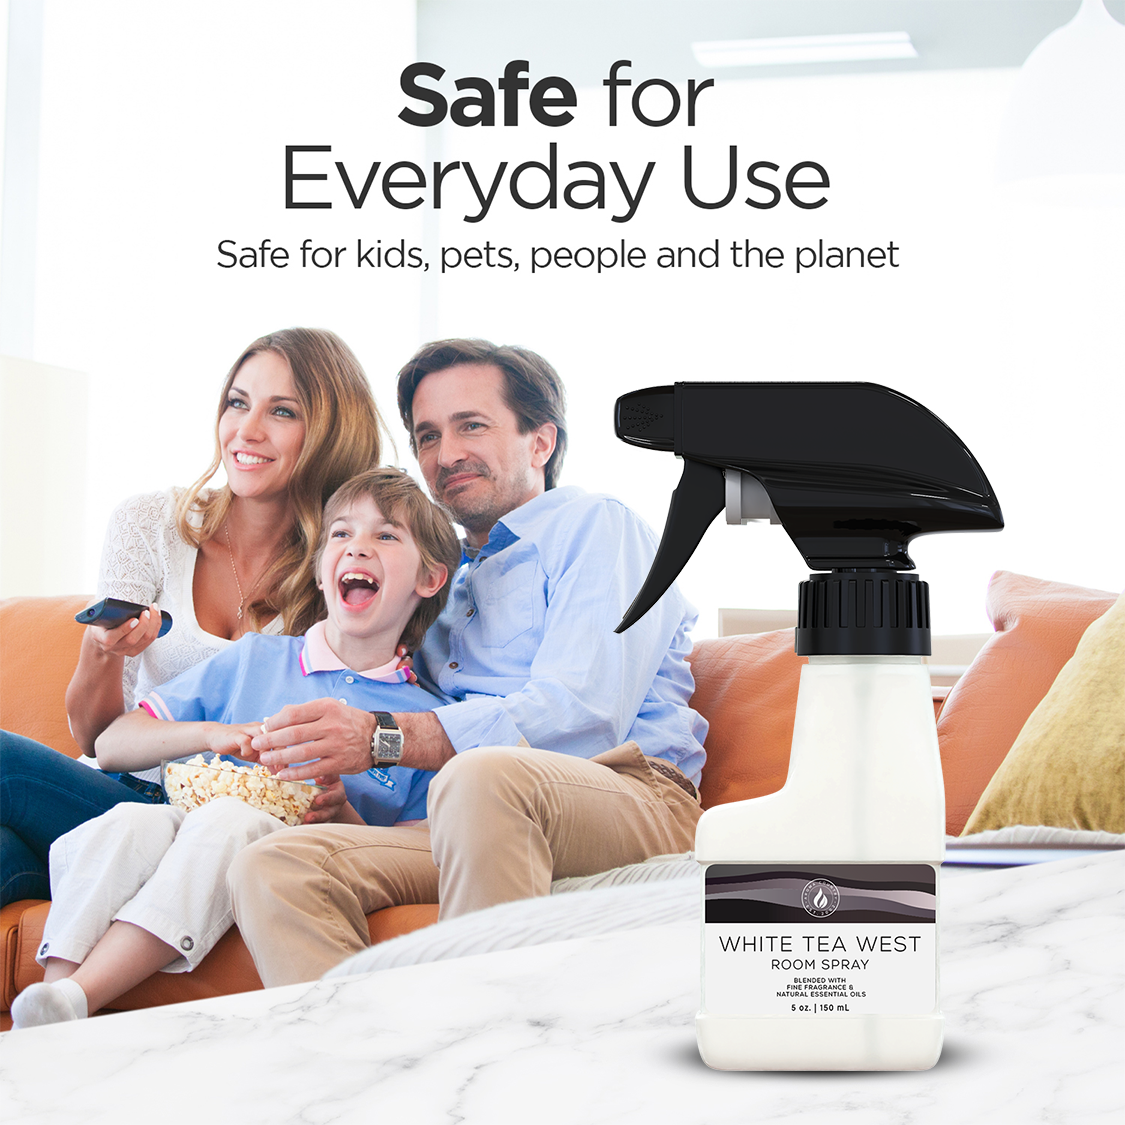 Safe for everyday use. Safe for kids, pets, people, and the planet.